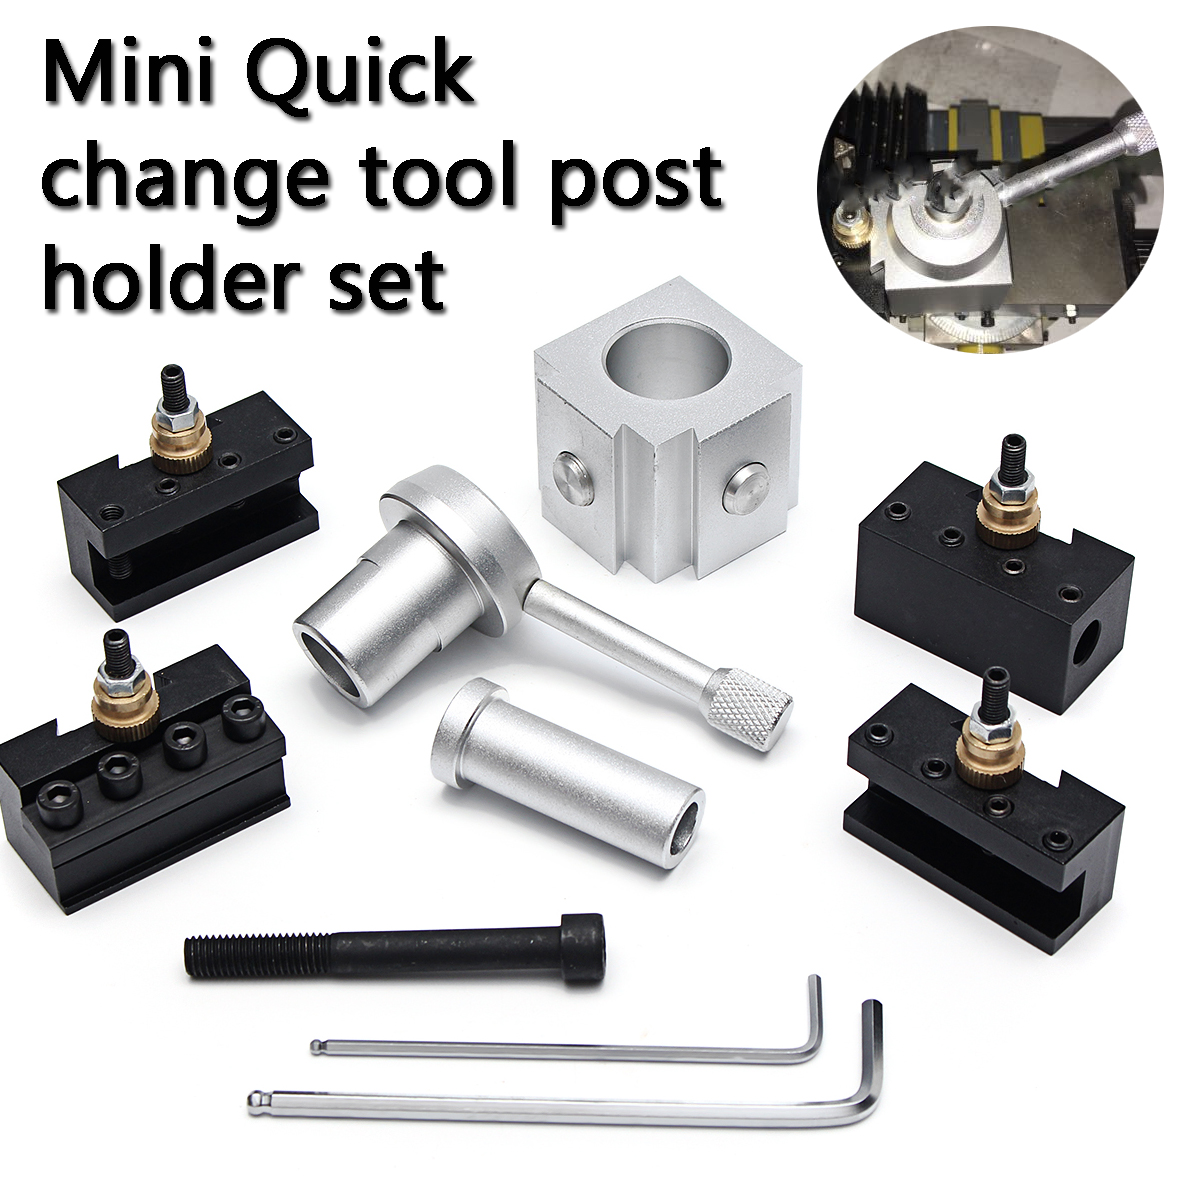 Mini-Quick-Change-Tool-Post-Holder-Set-with-9pcs-38-Inch-Boring-Bar-and-5pcs-Indexable-Blade-1190276-2